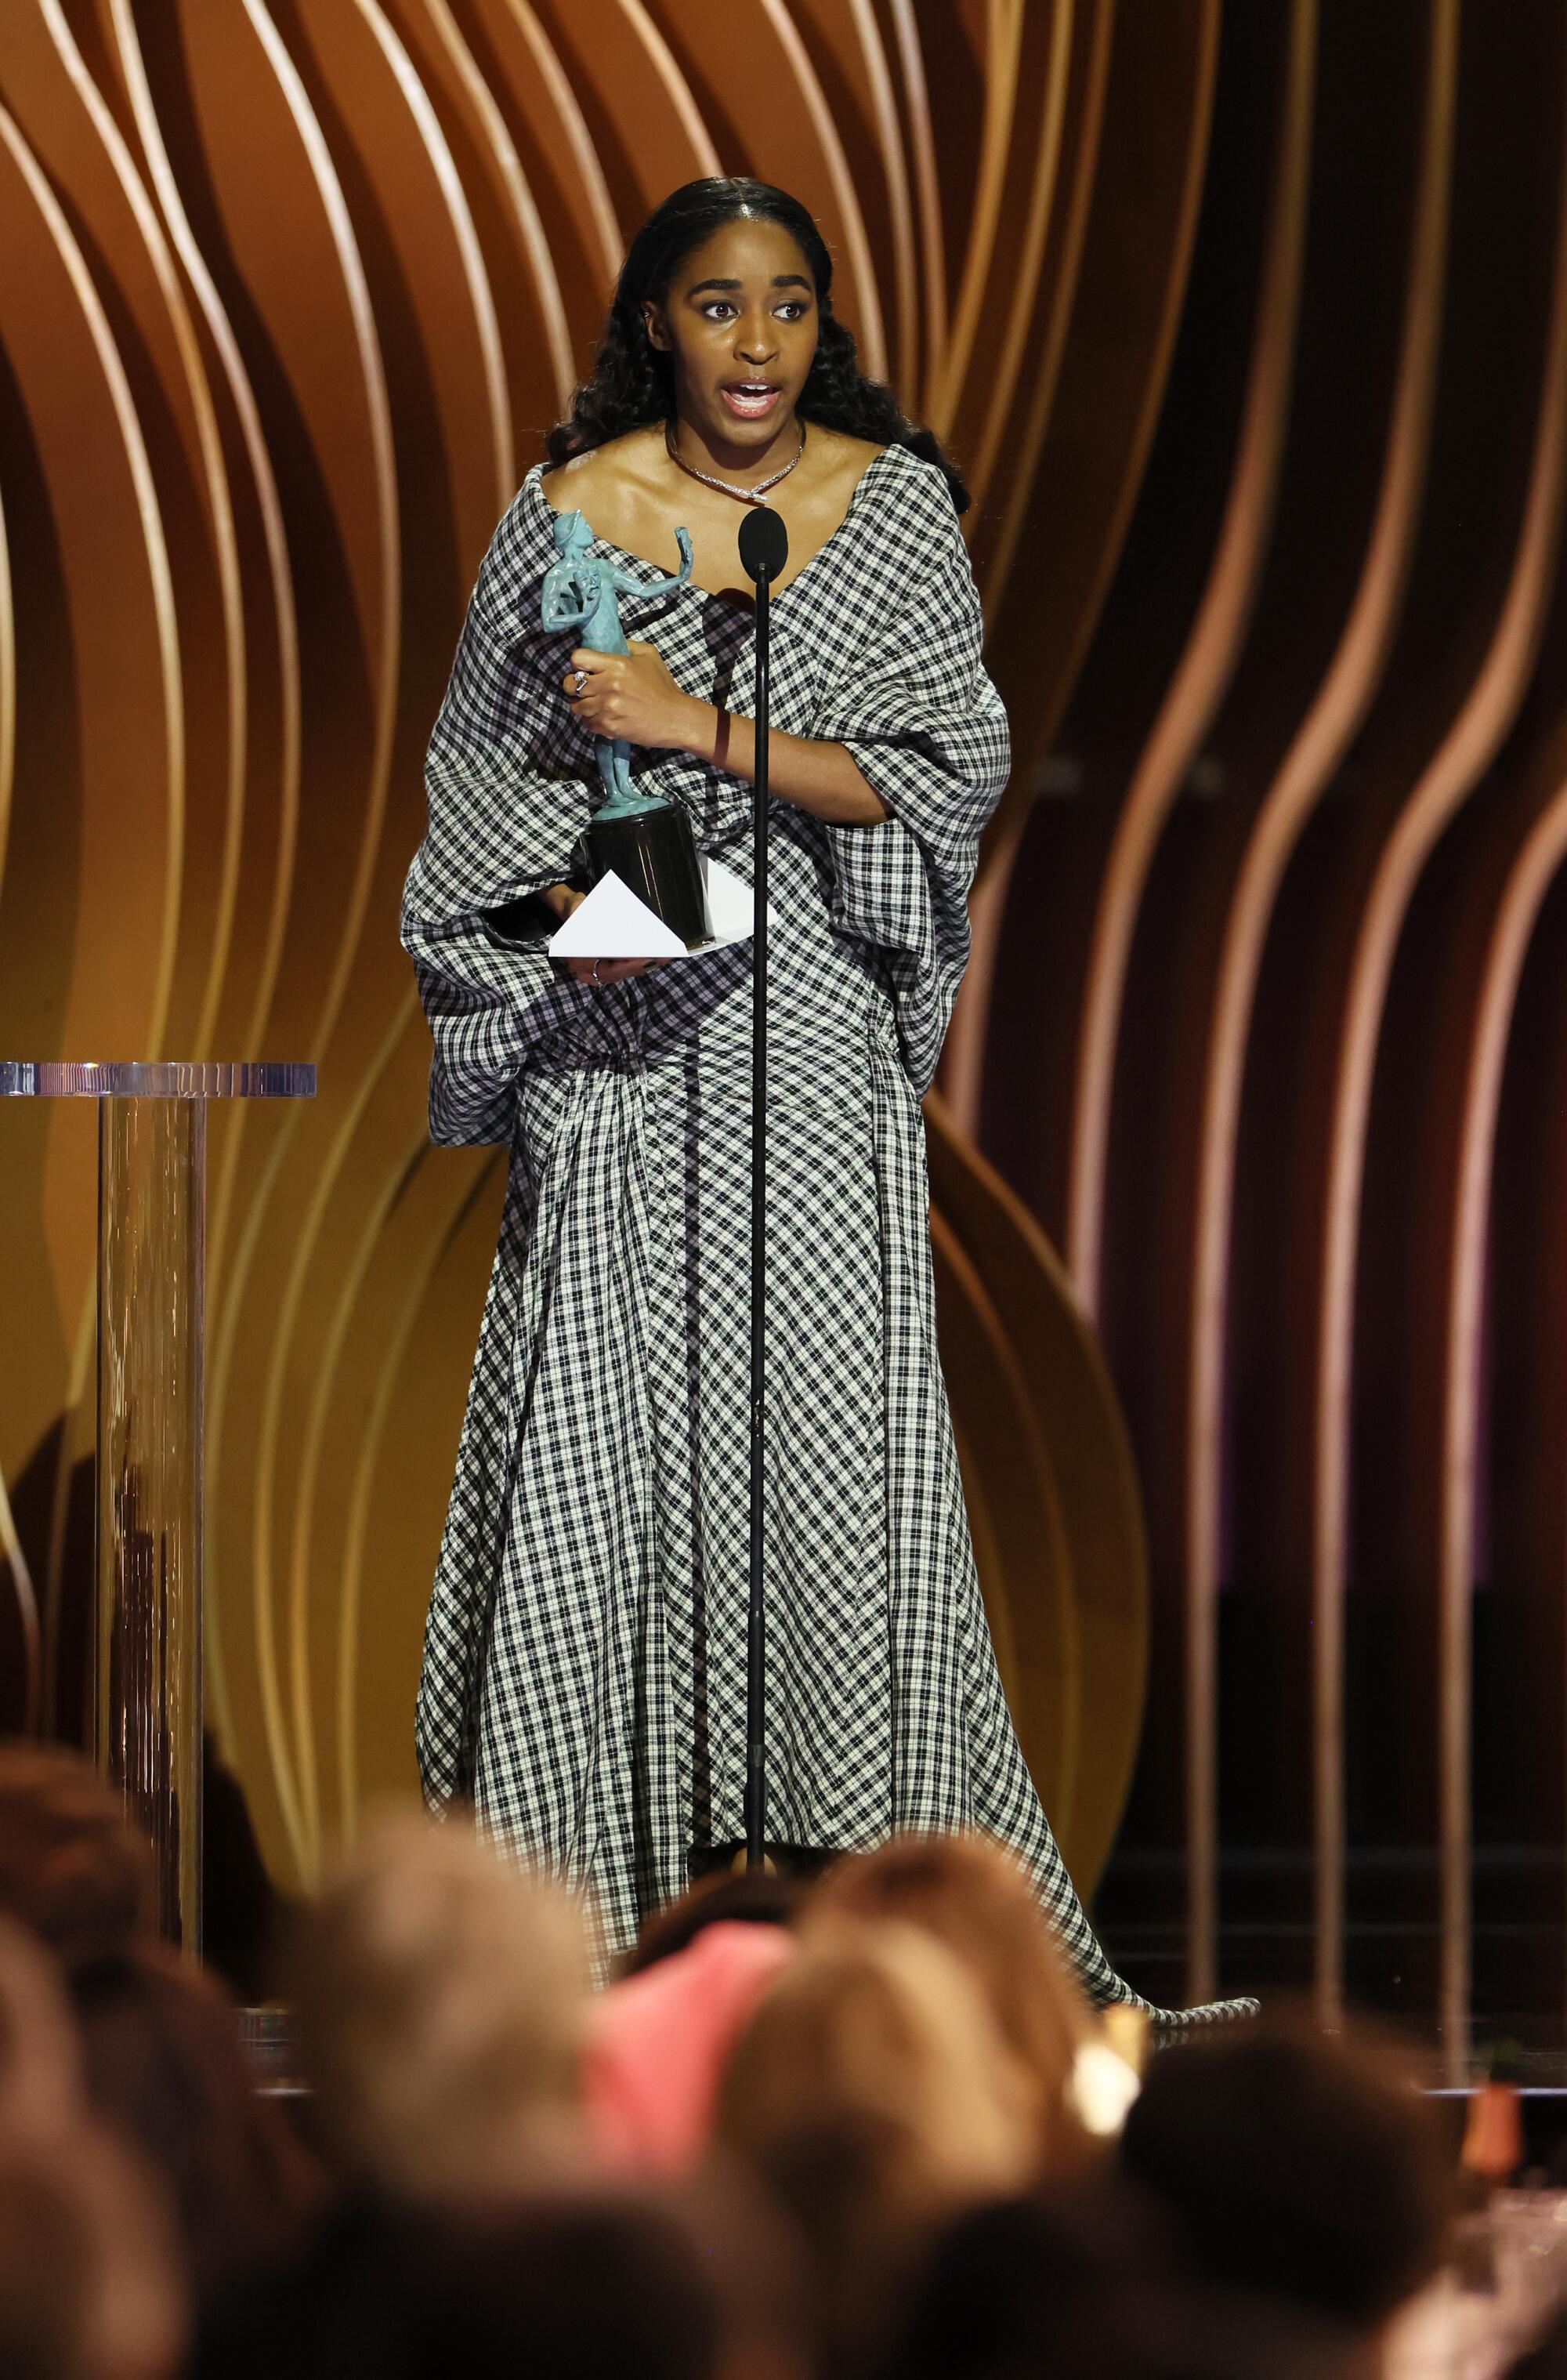 Ayo Edebiri wins for female actor in a comedy series.